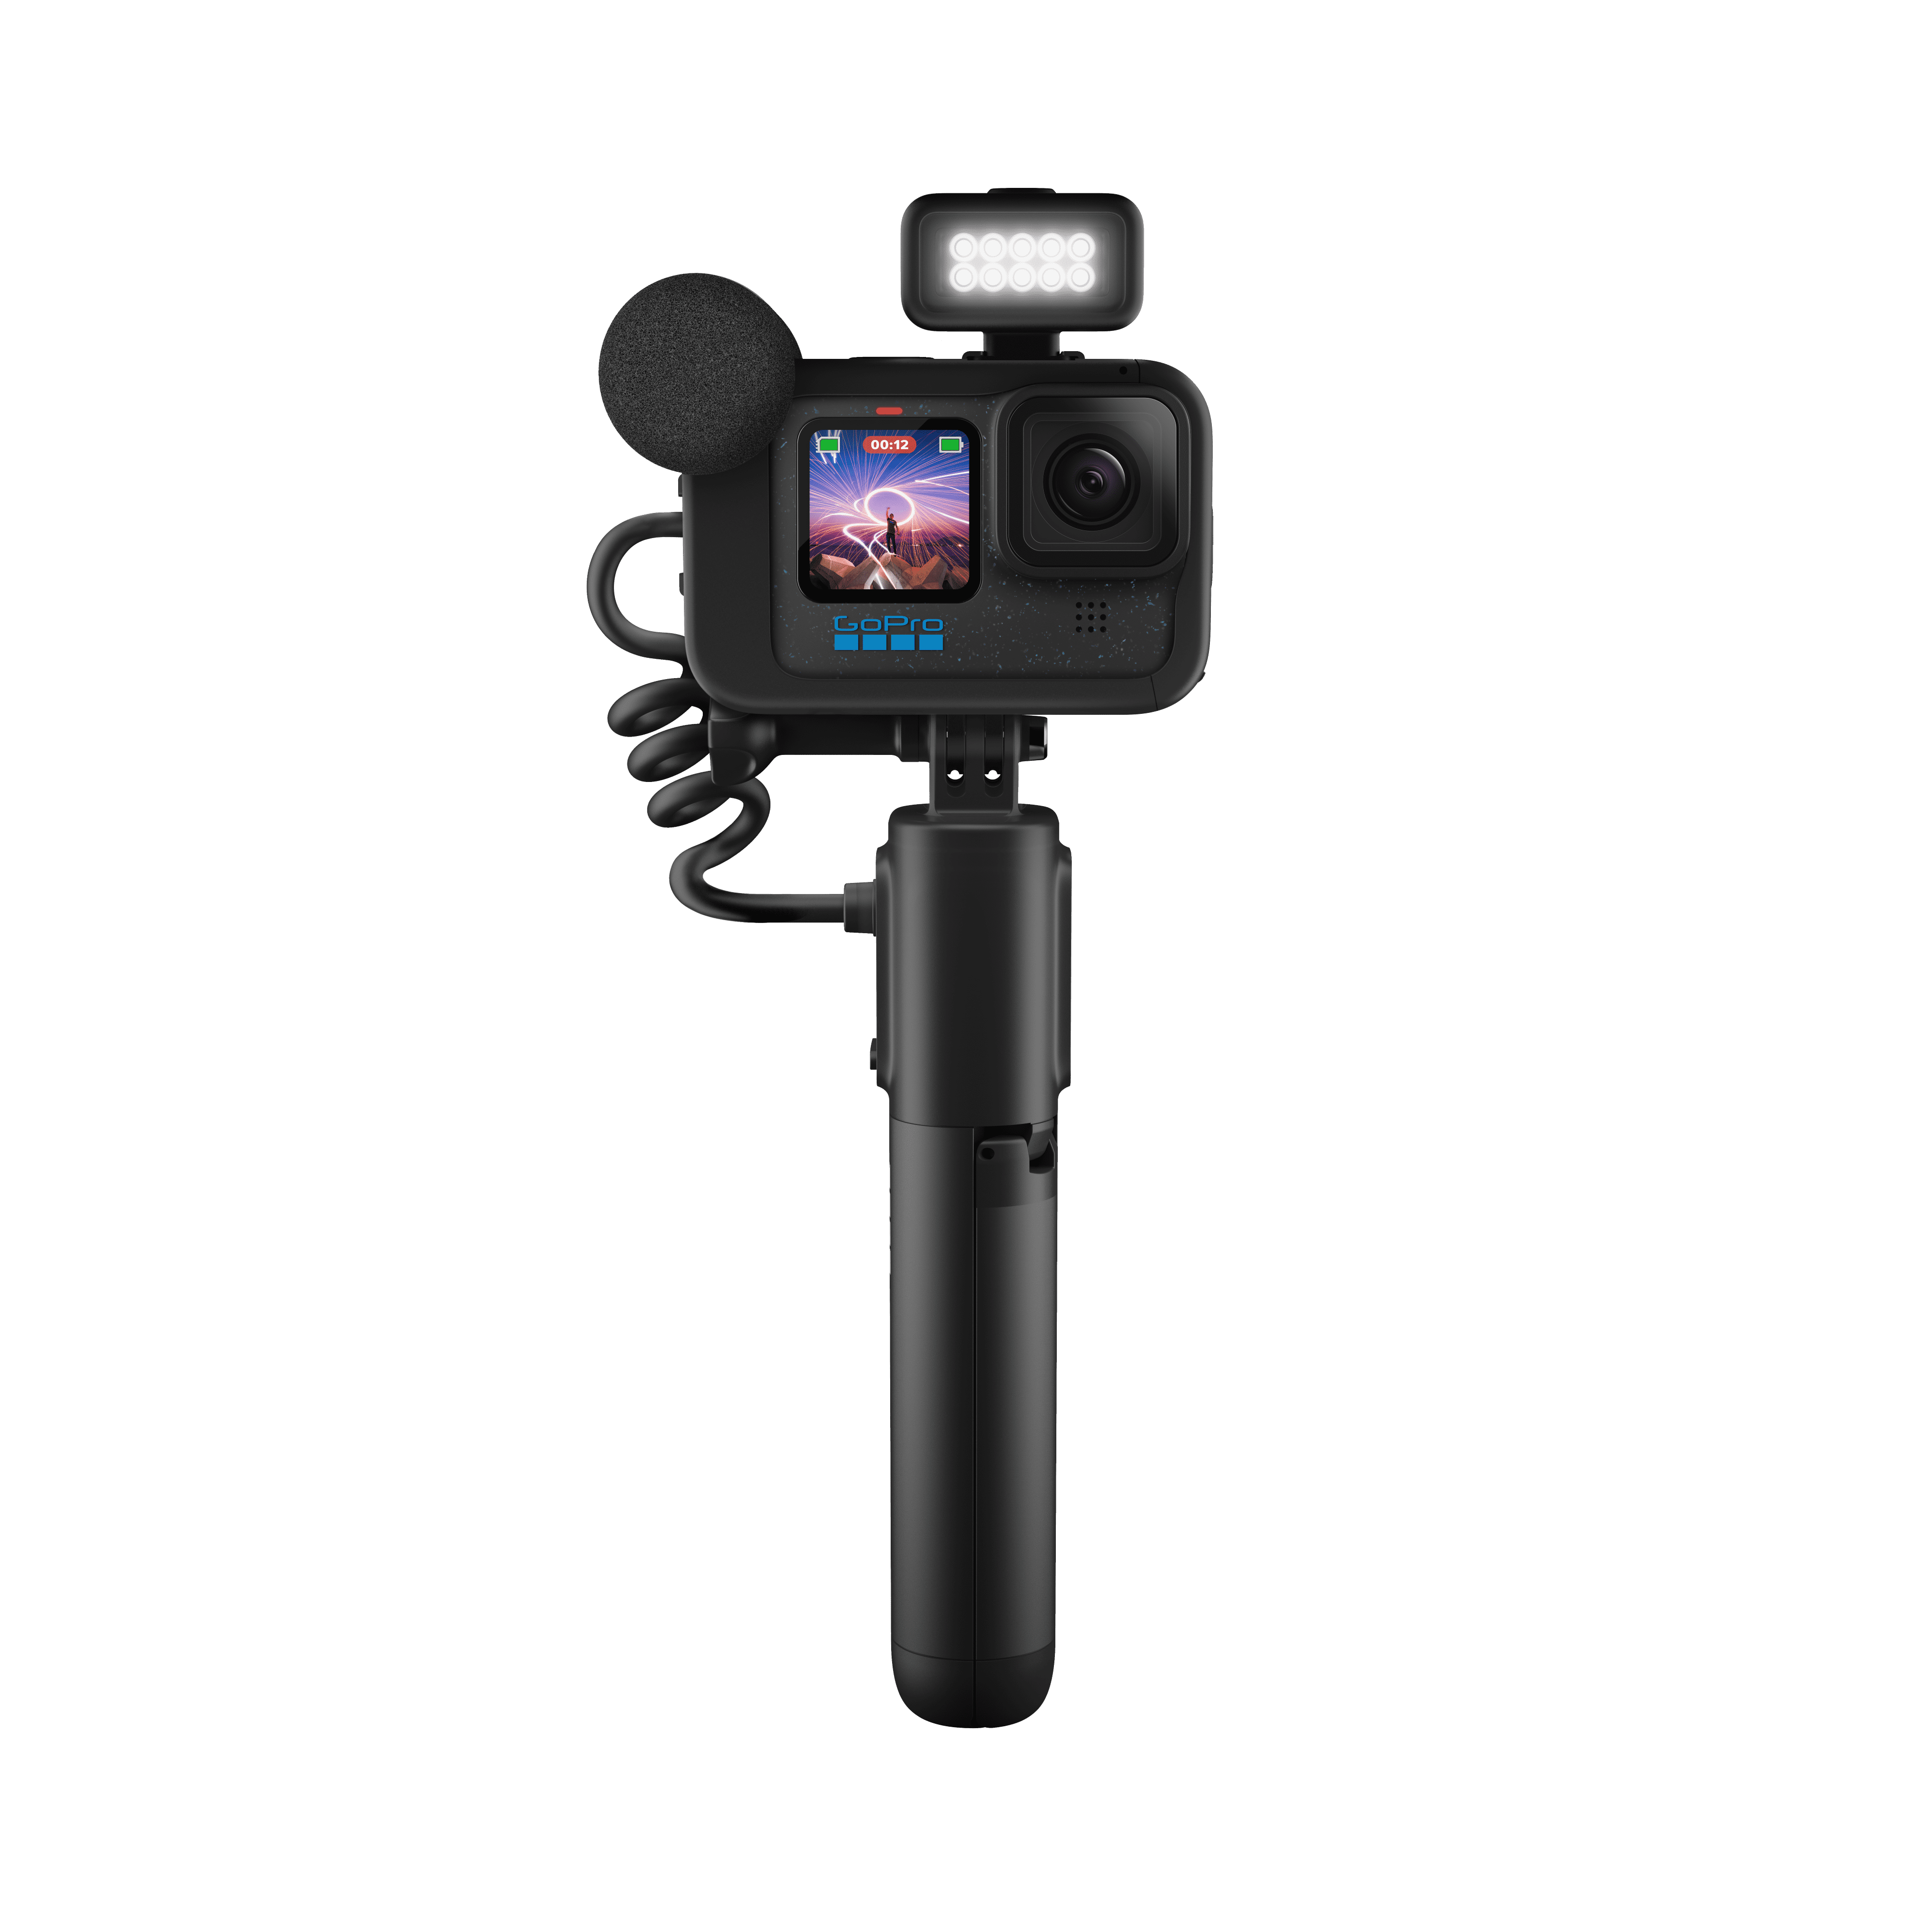 GoPro HERO12 Black Creator Edition - Includes HERO12 Black , Volta (Battery  Grip, Tripod, Remote), Media Mod, Light Mod, Enduro Battery, and Carrying  Case | Action-Cams